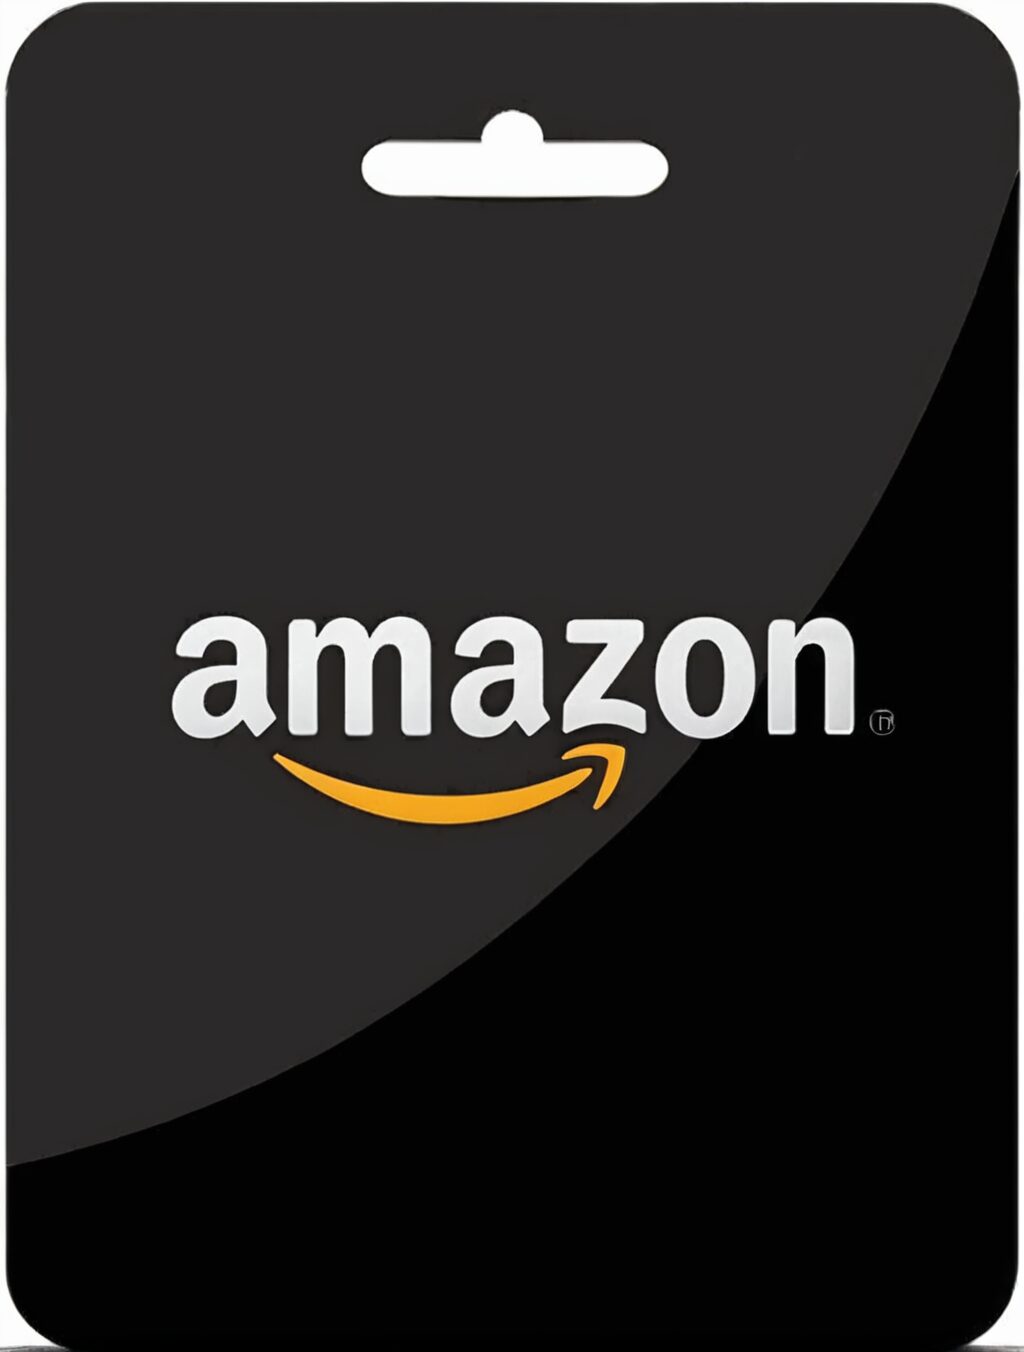 amazon gift card use in japan